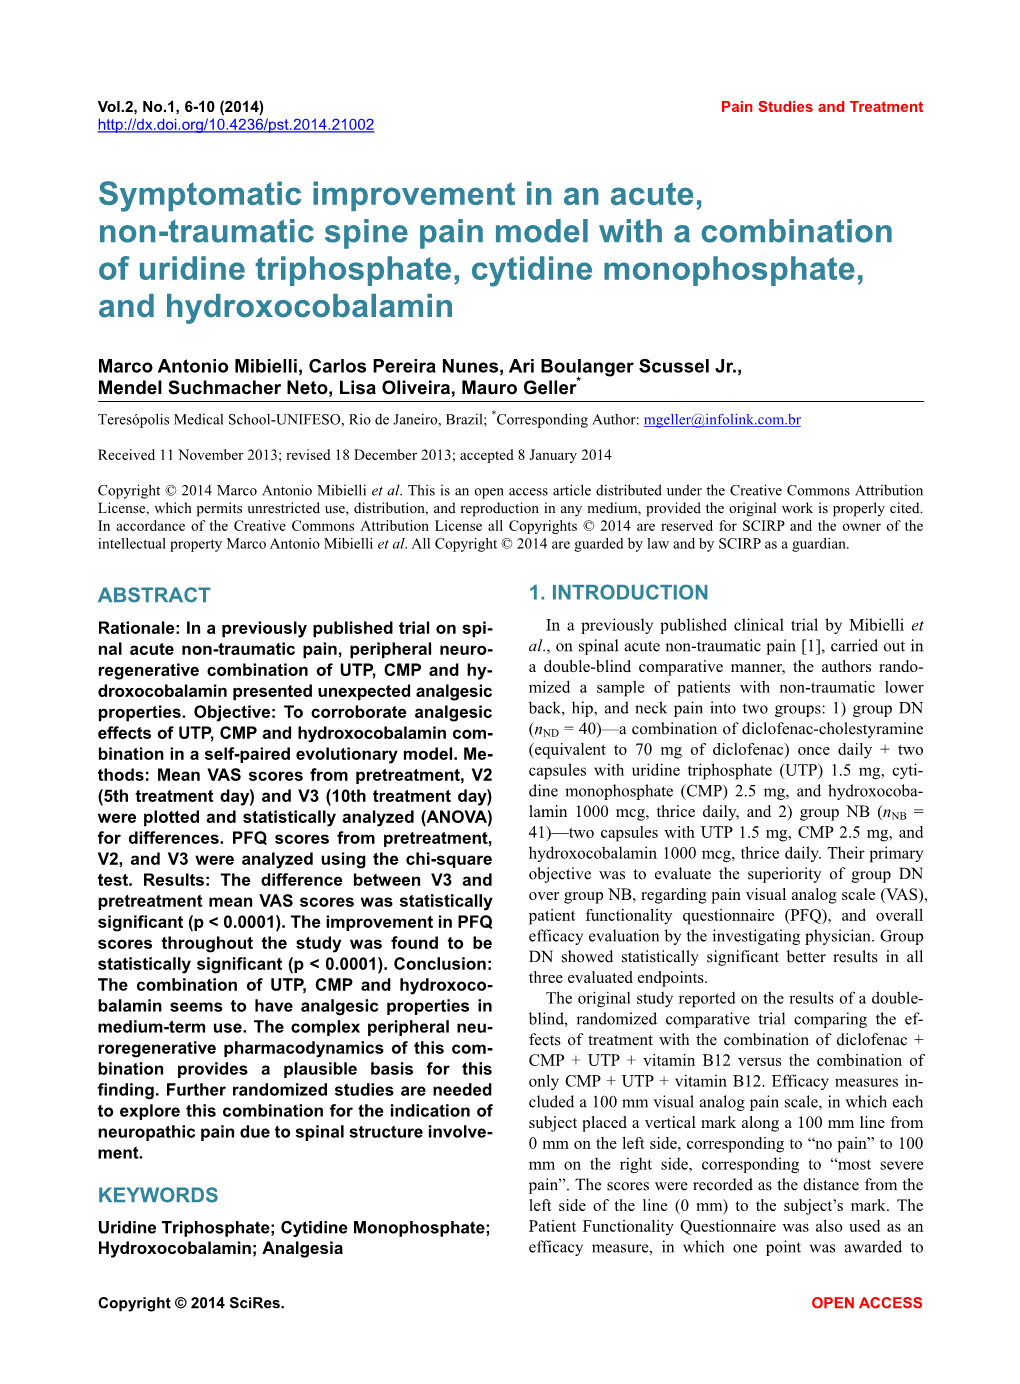 Symptomatic Improvement in an Acute, Non-Traumatic Spine Pain Model with a Combination of Uridine Triphosphate, Cytidine Monophosphate, and Hydroxocobalamin